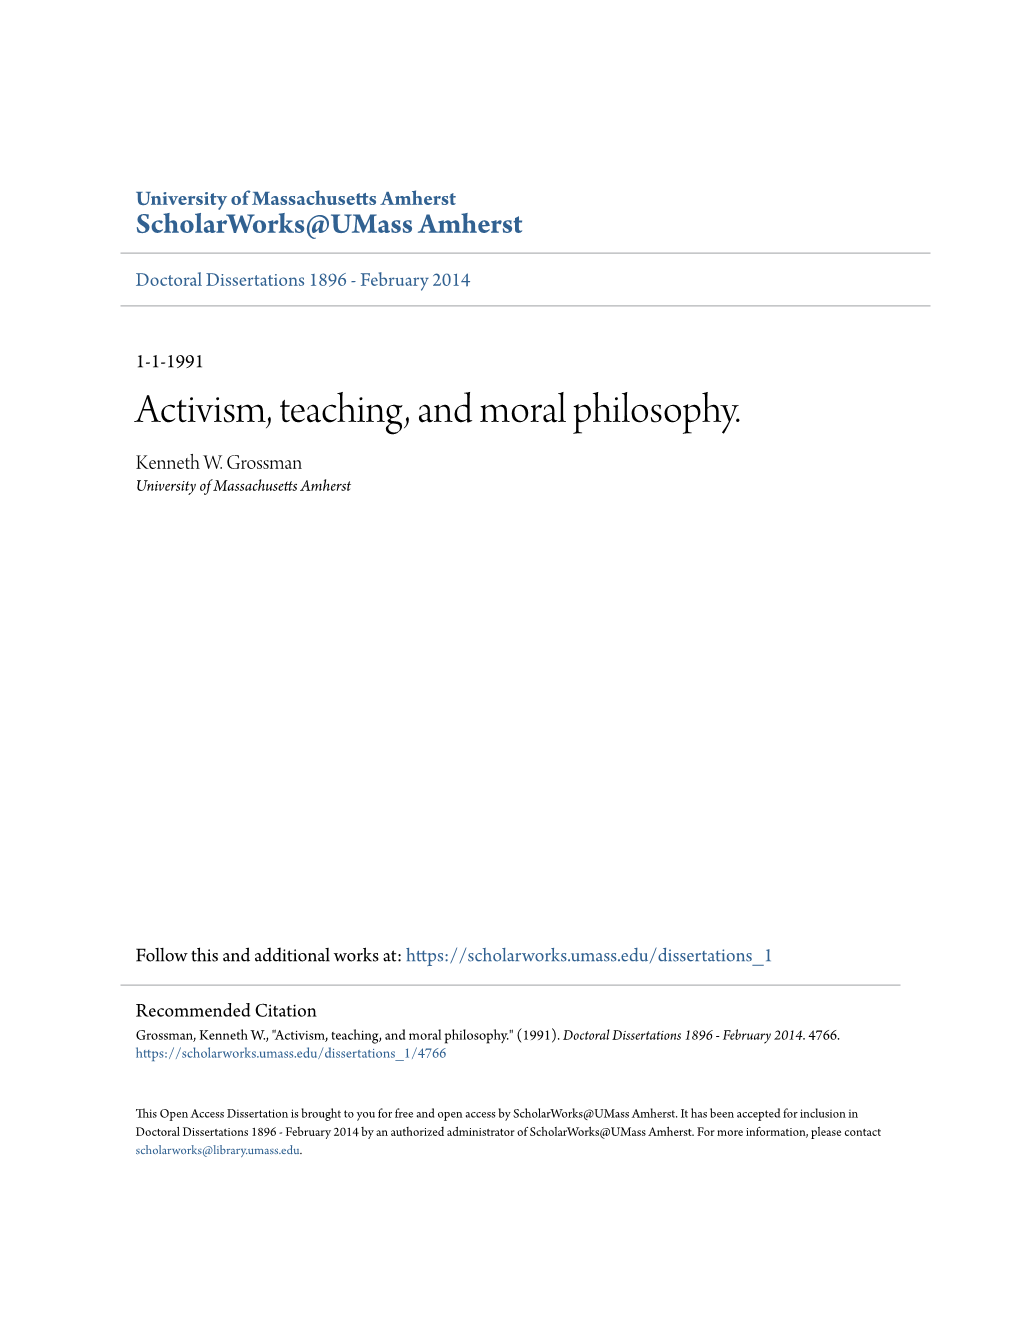 Activism, Teaching, and Moral Philosophy. Kenneth W